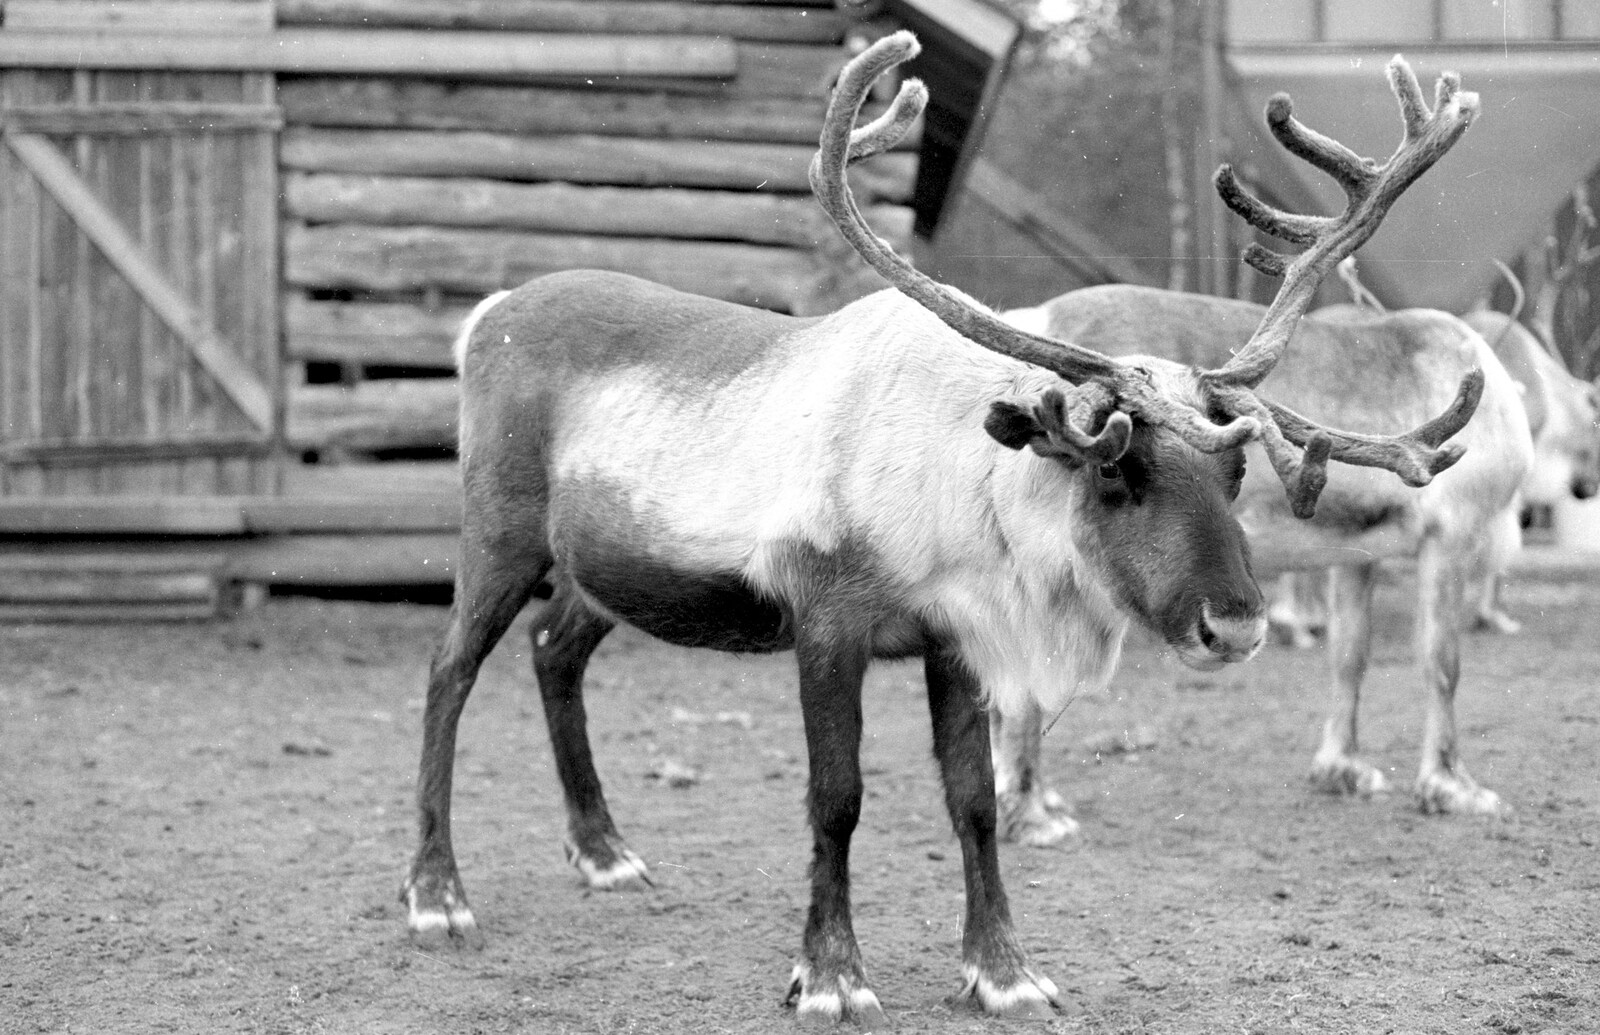 Lappish reindeer from A Trip to Rovaniemi and the Arctic Circle, Lapland, Finland - 28th November 1999